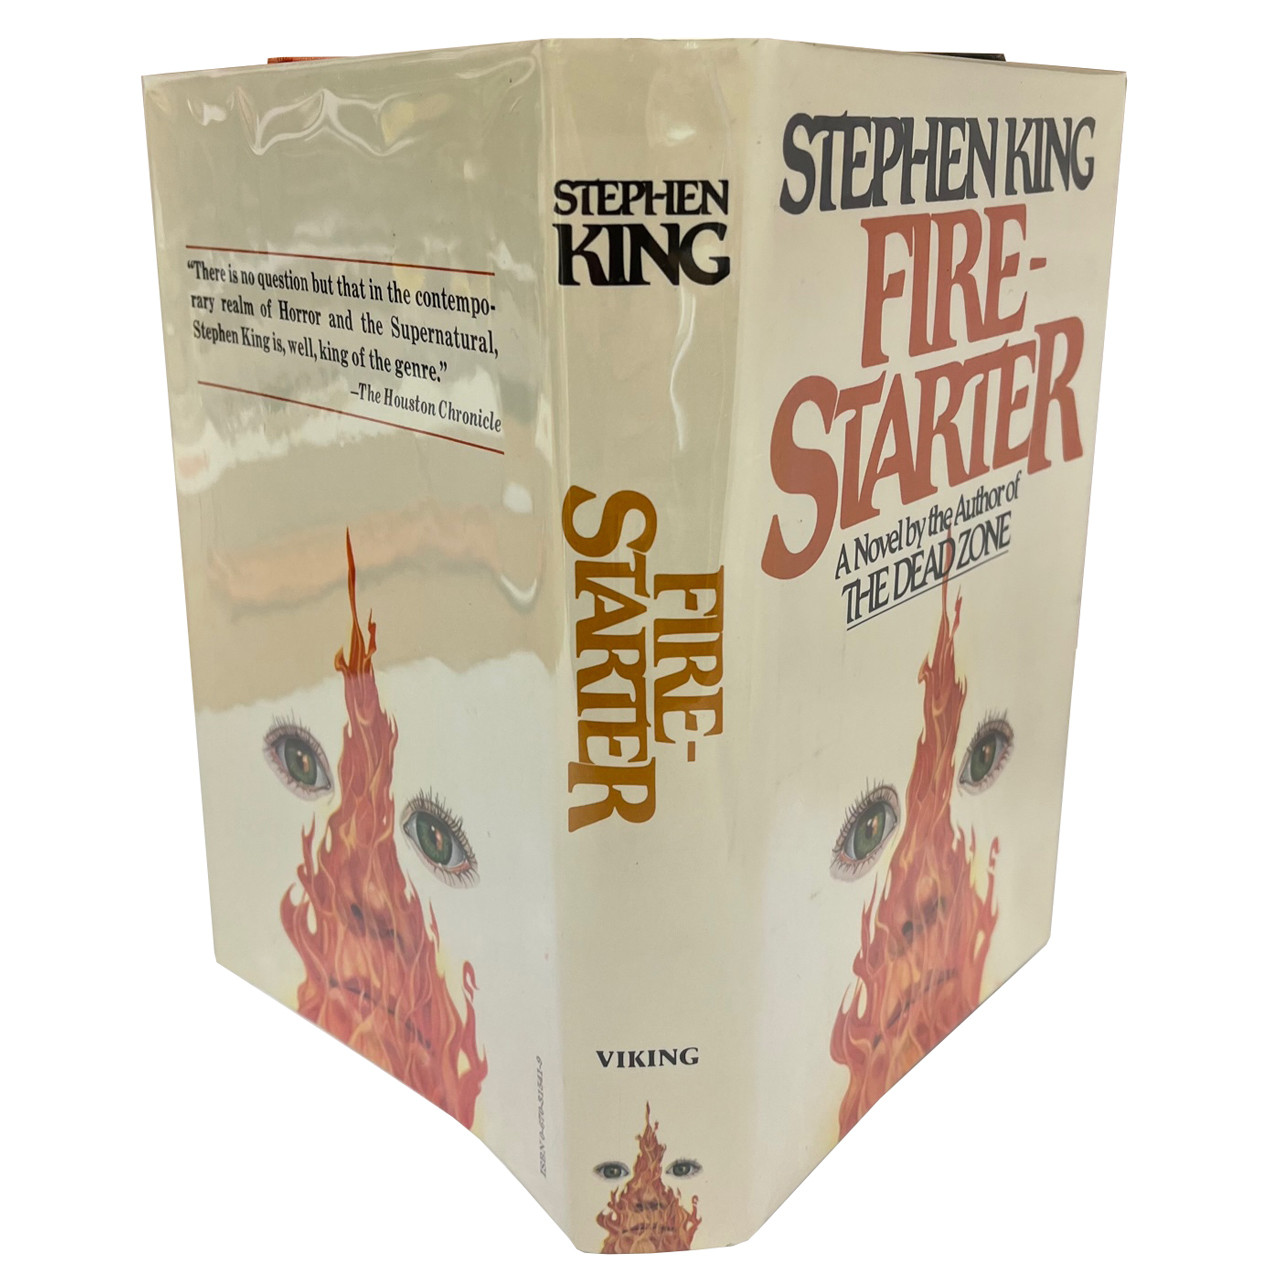 Viking Press 1980 - Stephen King "Firestarter" Signed First Edition, First Printing Slipcased, Date Of Publication [F/NF]